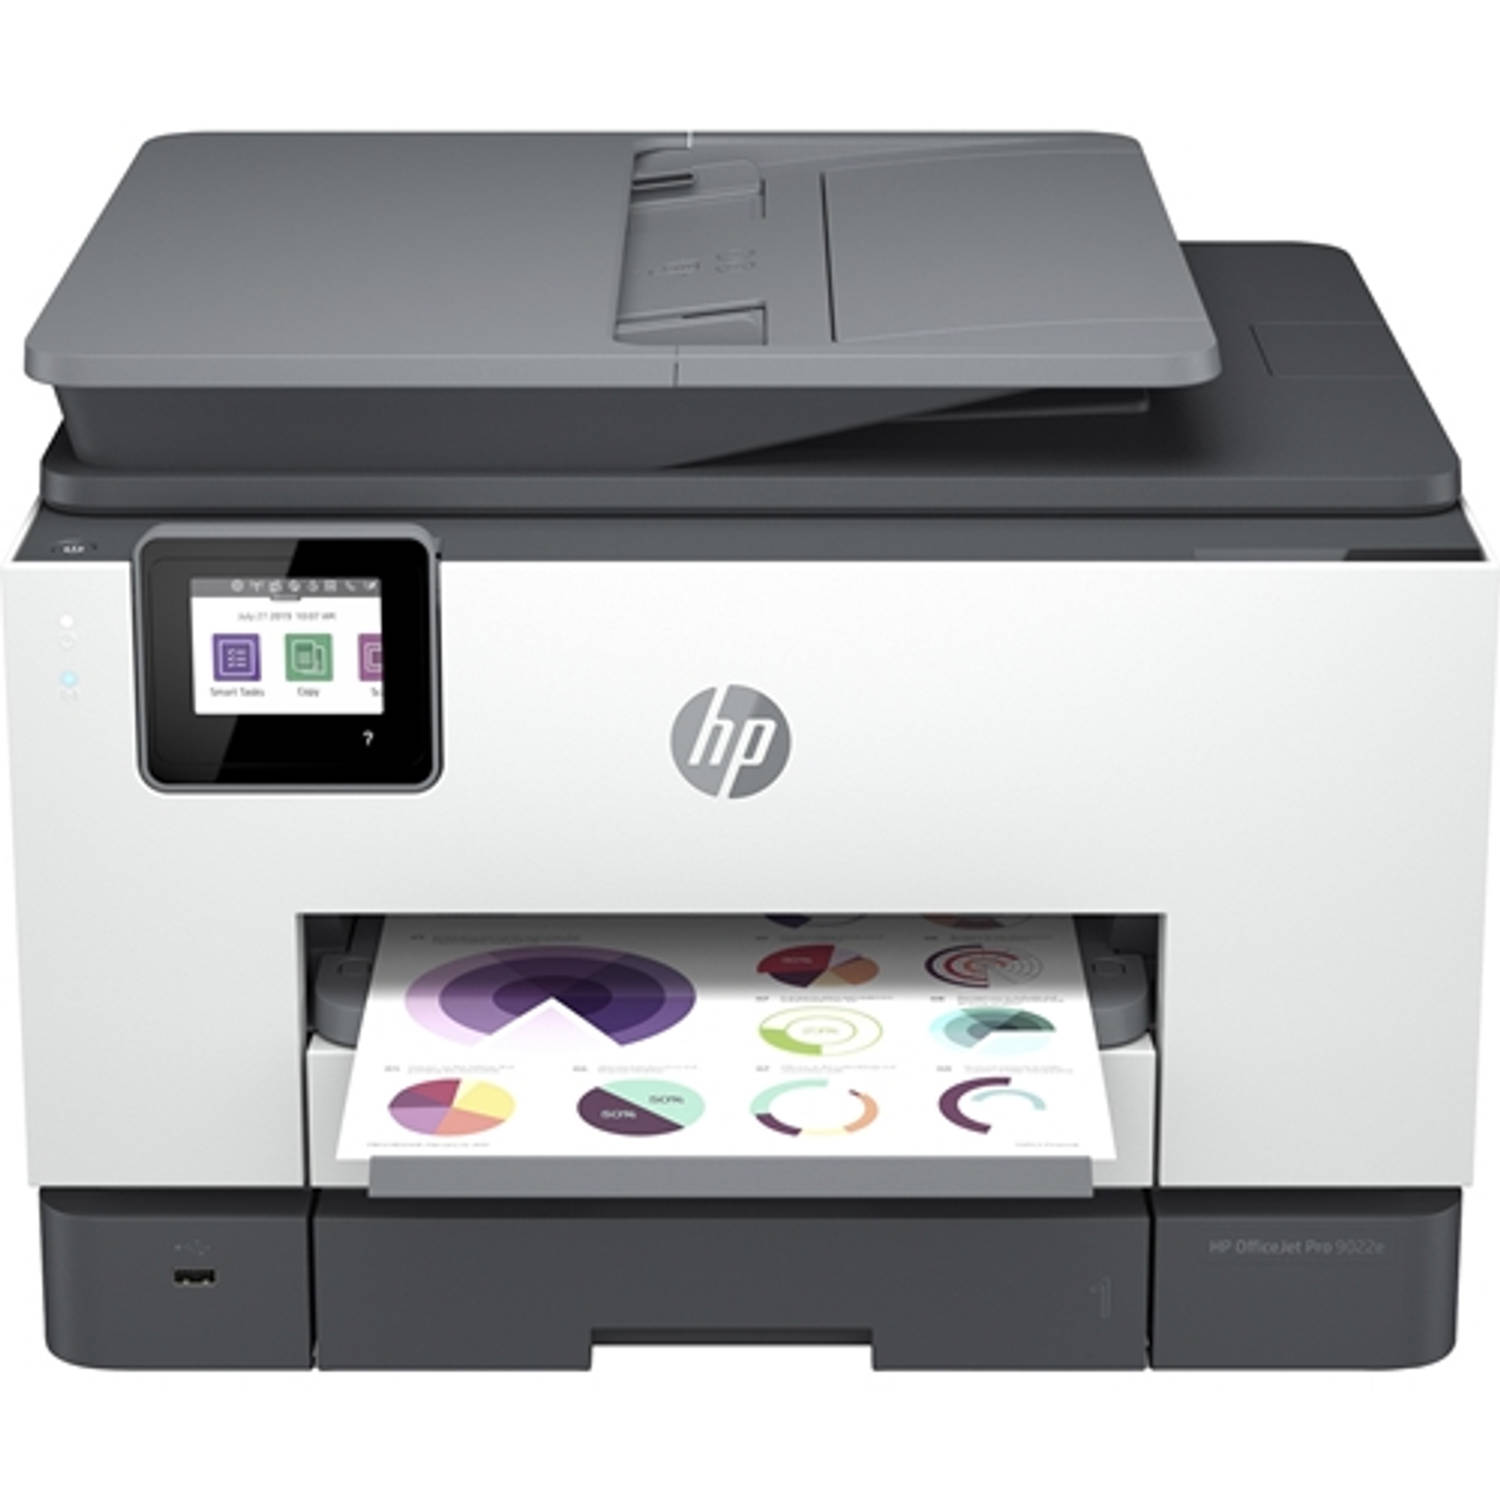 HP all-in-one printer OfficeJet Pro 9022E HP+ - Instant Ink